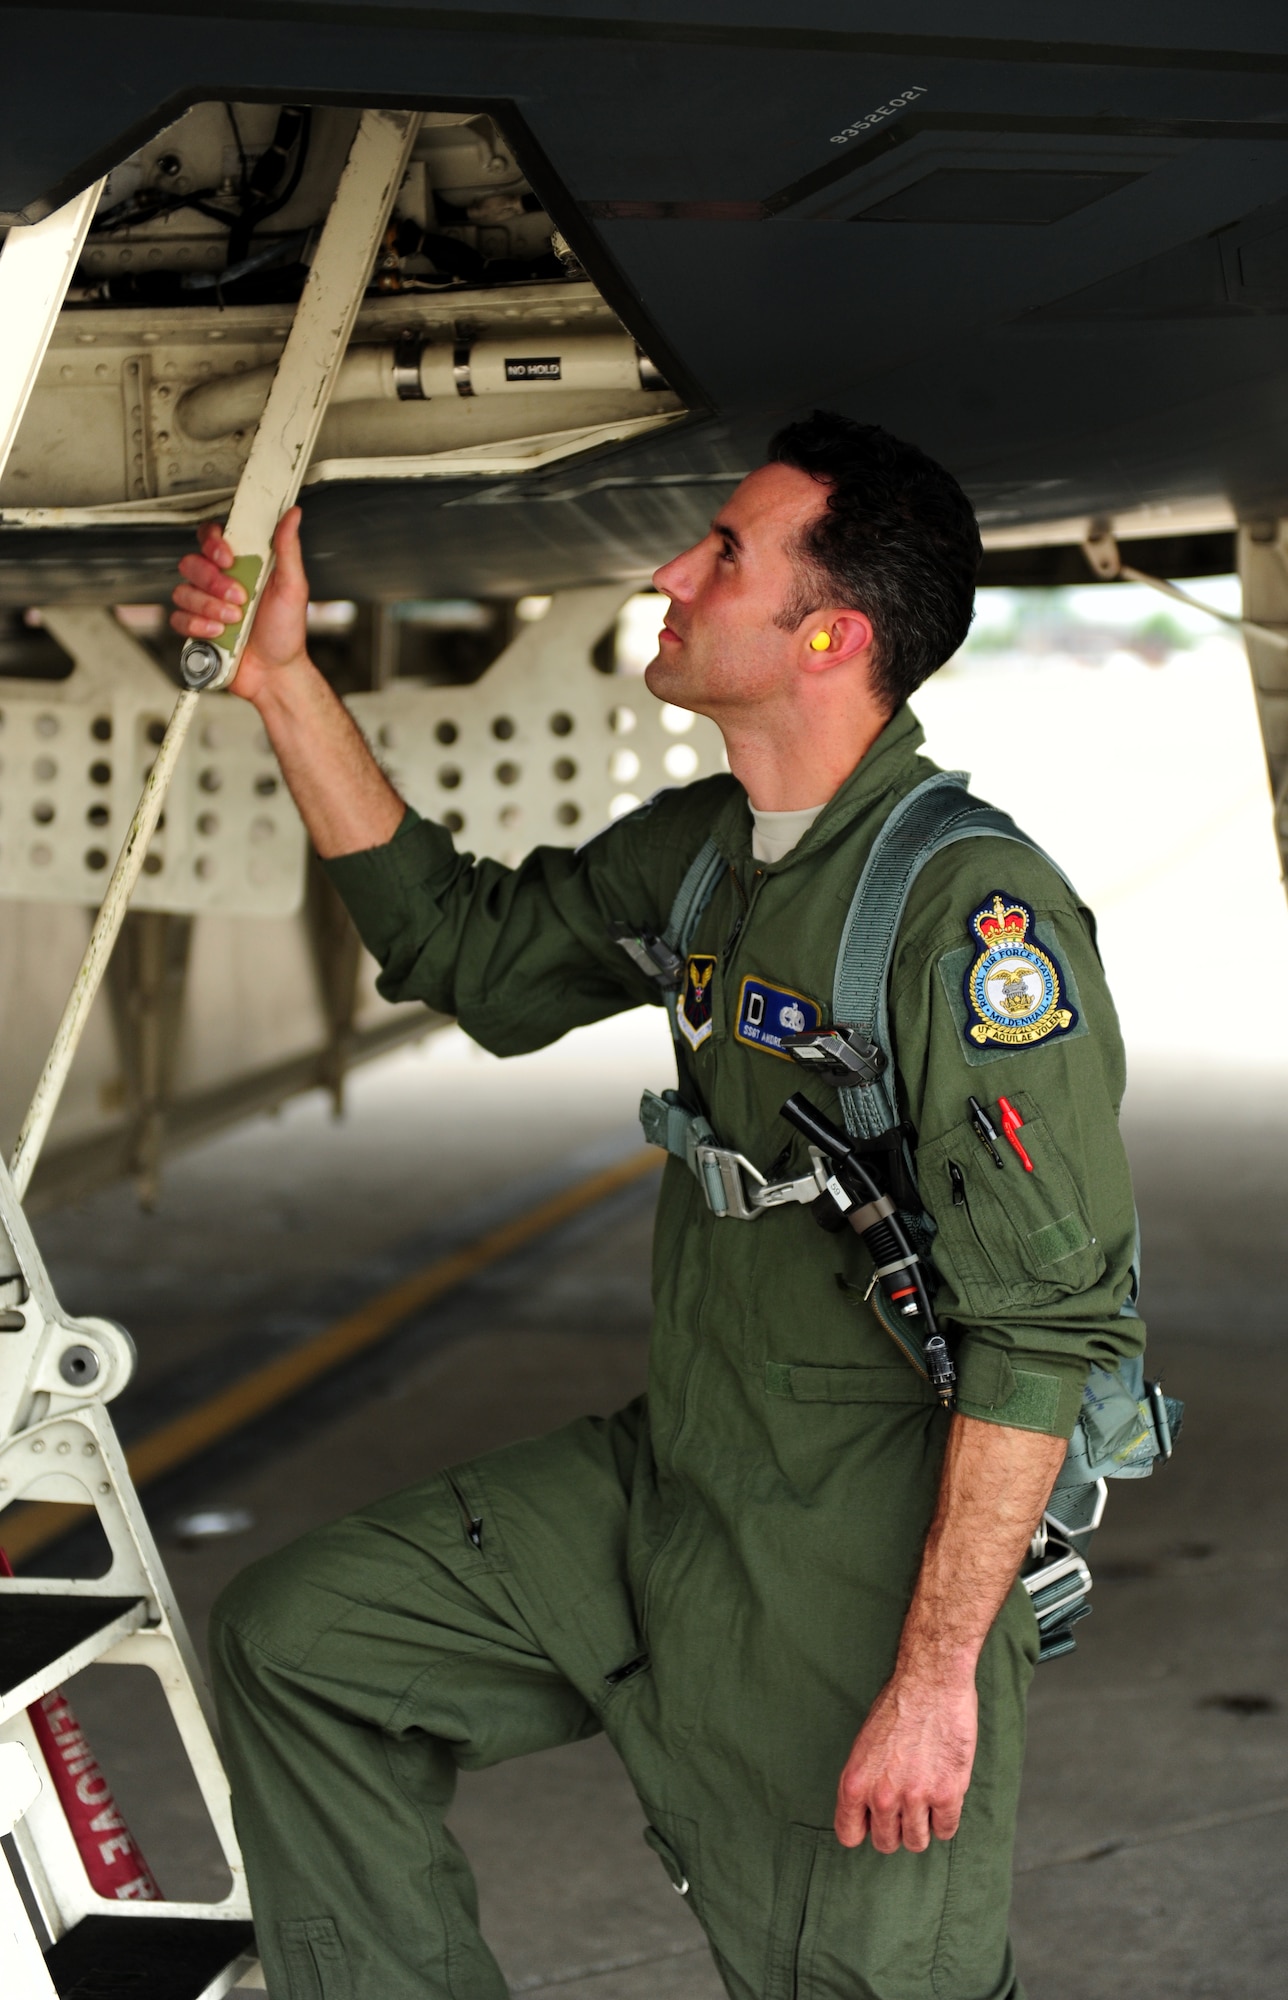 Tech. Sgt. Andrew Jones, 509th Aircraft Maintenance Squadron dedicated crew chief, prepares to board a B-2 Spirit at Whiteman Air Force Base, Mo., July 10, 2015. Jones was awarded an incentive flight in the B-2 Spirit for being named the 2013 Air Force Global Strike Command Crew Chief of the Year. Two other Crew Chiefs of the Year were also given incentive flights the same day. (U.S. Air Force photo by Senior Airman Joel Pfiester/Released)